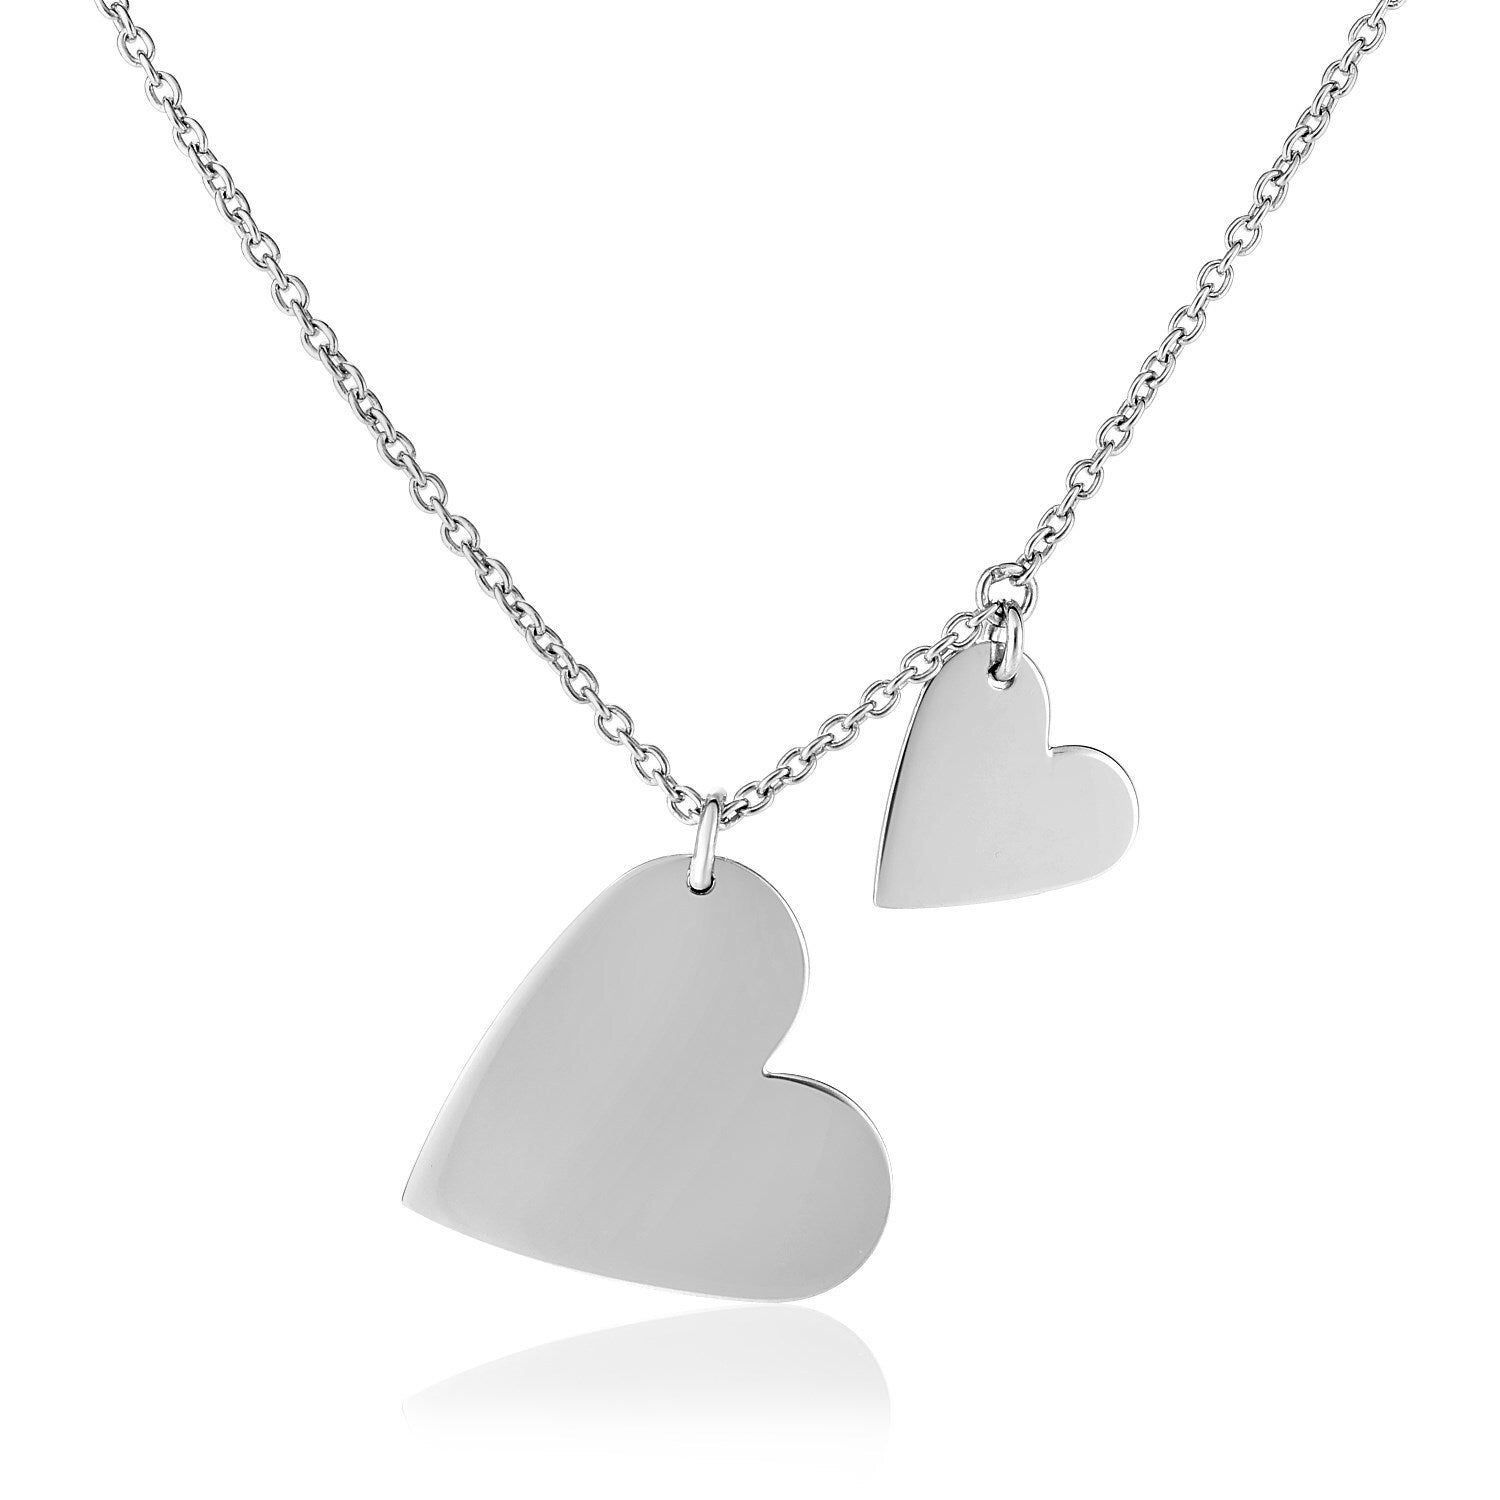 Sterling Silver 18 inch Necklace with Two Polished Hearts, size 18''